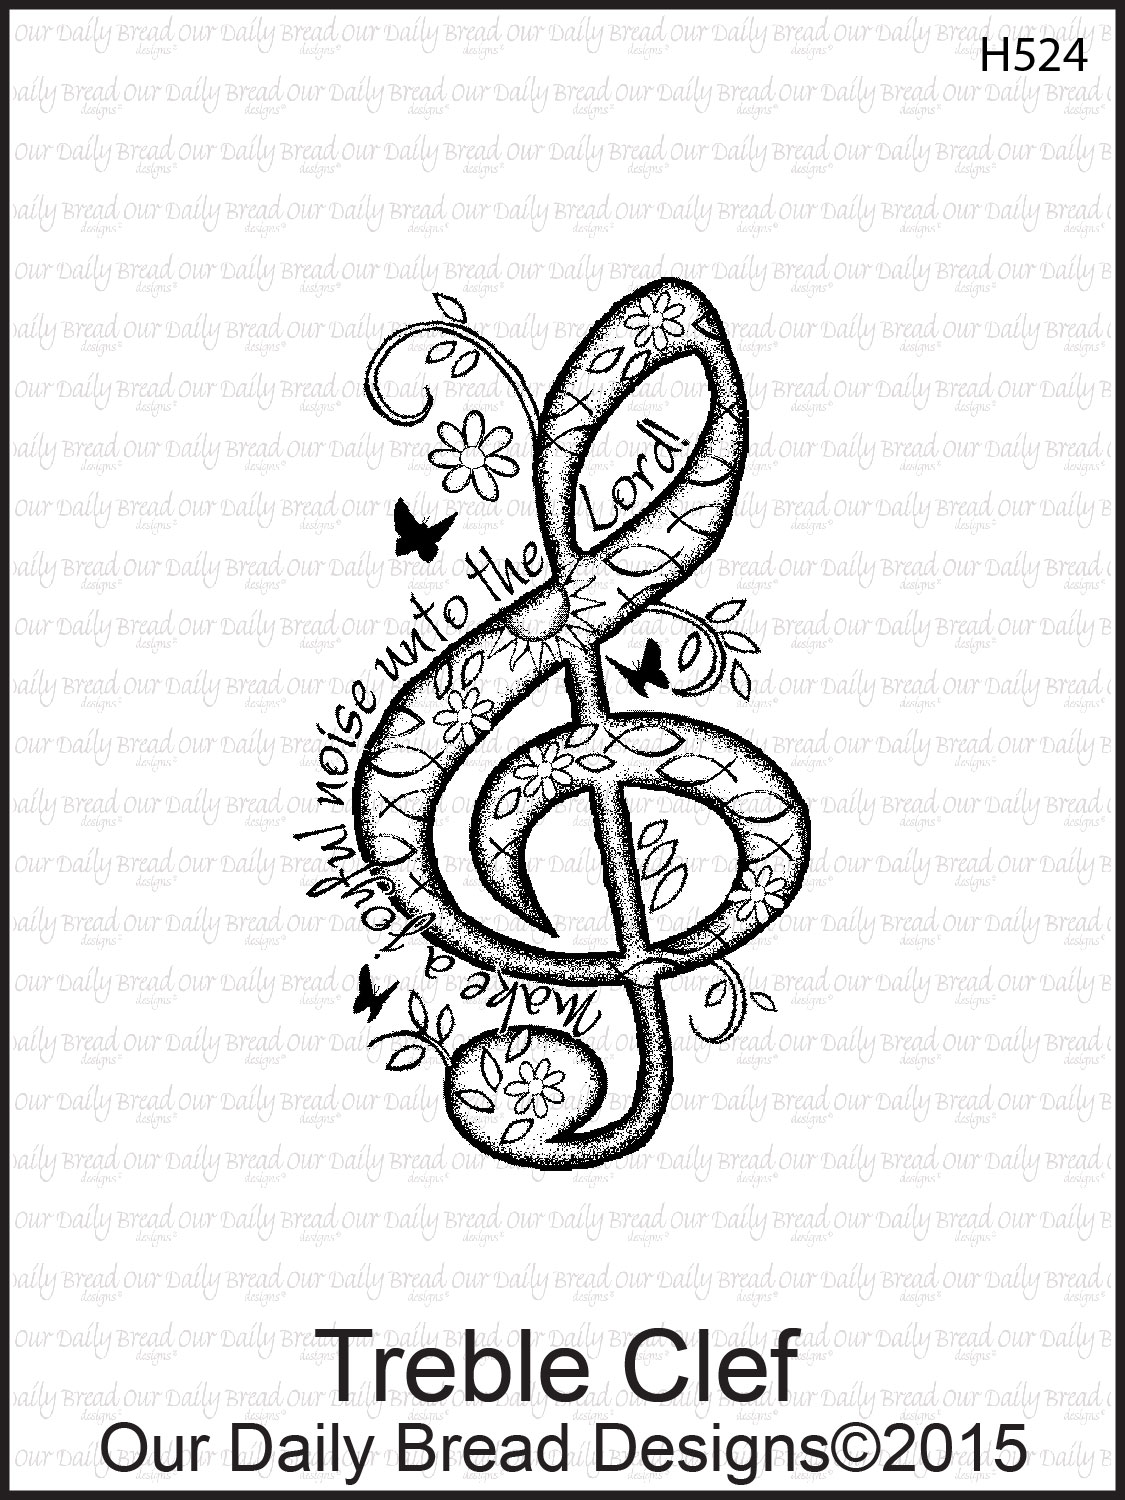 https://www.ourdailybreaddesigns.com/index.php/h524-treble-clef.html